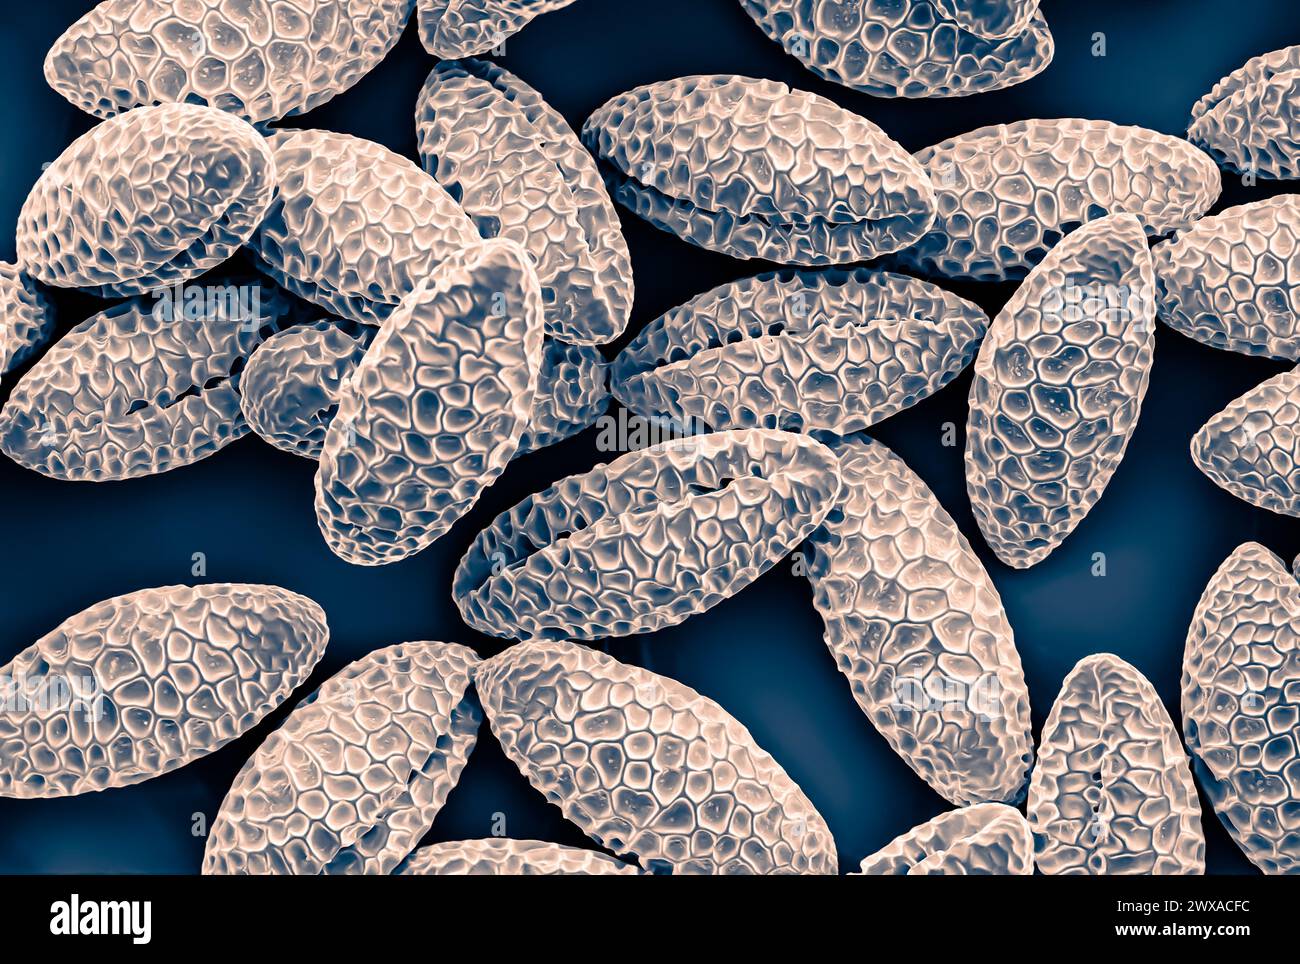 pollen grains photographed with an electron microscope. Stock Photo